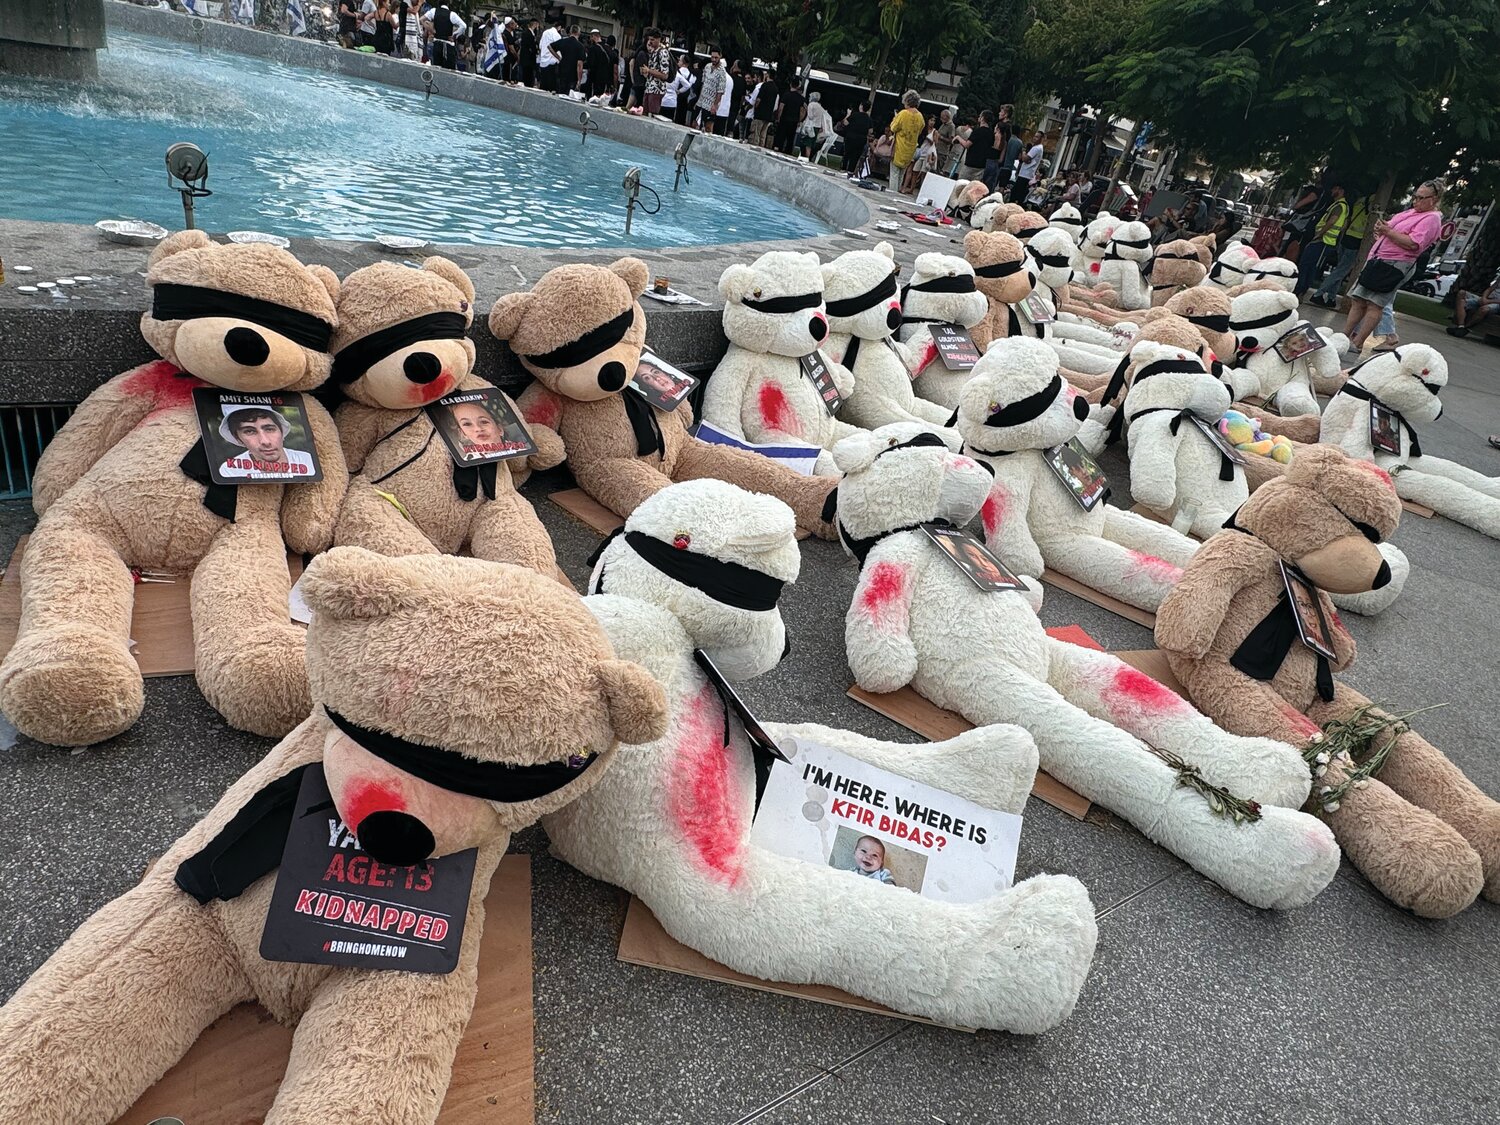 A display of 30 blindfolded teddy bears, each representing one of the children kidnapped by Hamas terrorists on Oct. 7 and taken back to the Gaza Strip, where they are being held hostage, draws thousands each day to Tel Aviv’s Dizengoff Square. Each bear has a photo, name and age of one of the child hostages.